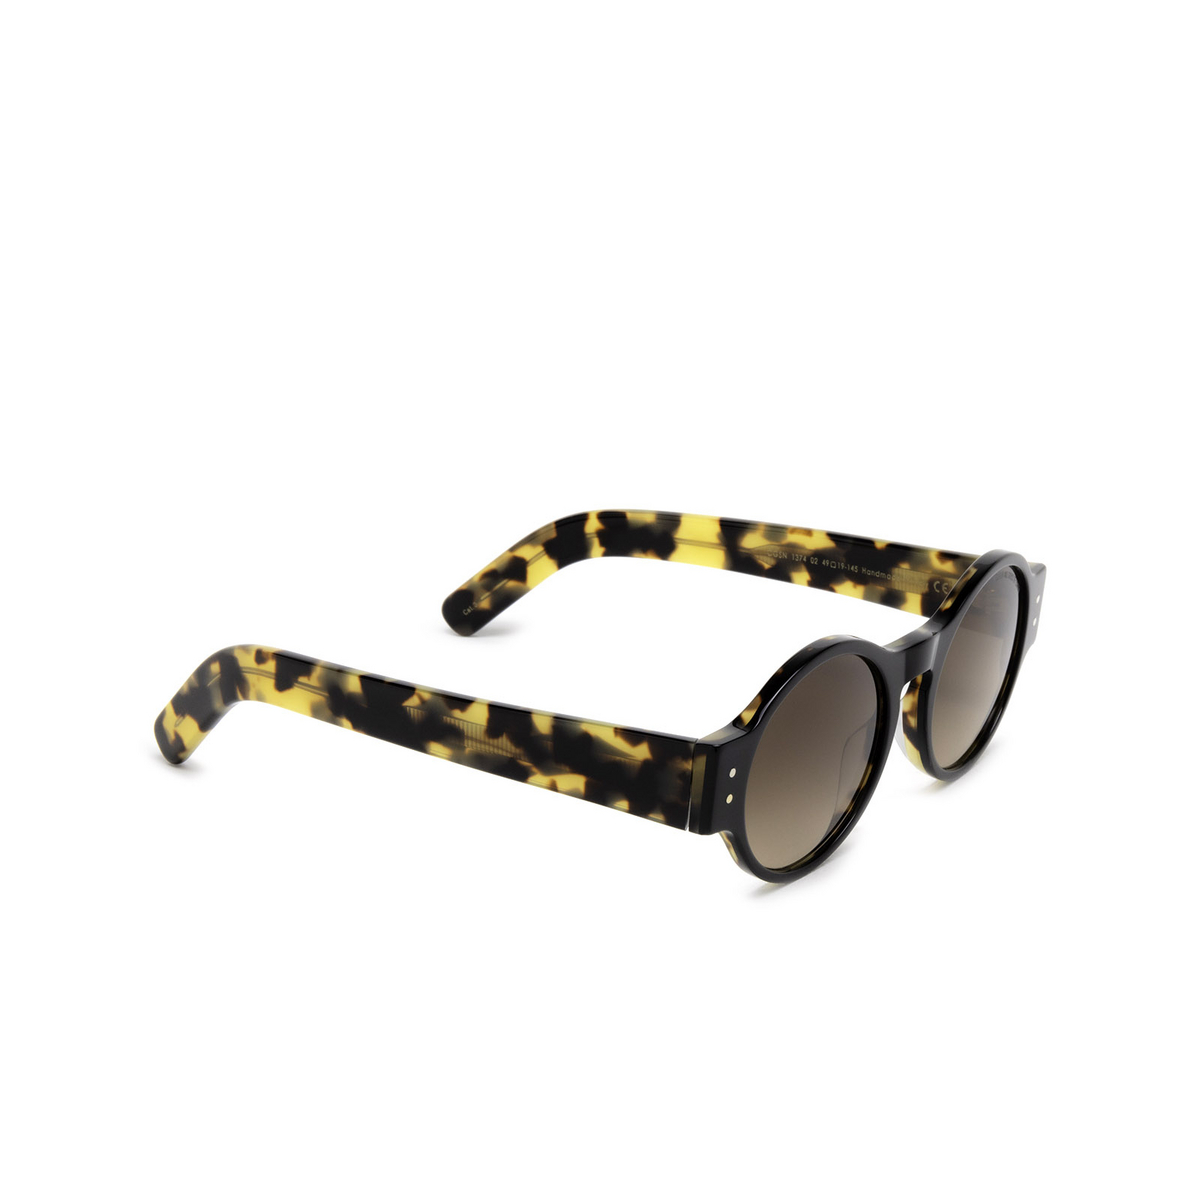 Cutler and Gross 1374 Sunglasses 02 Black on Camo - three-quarters view